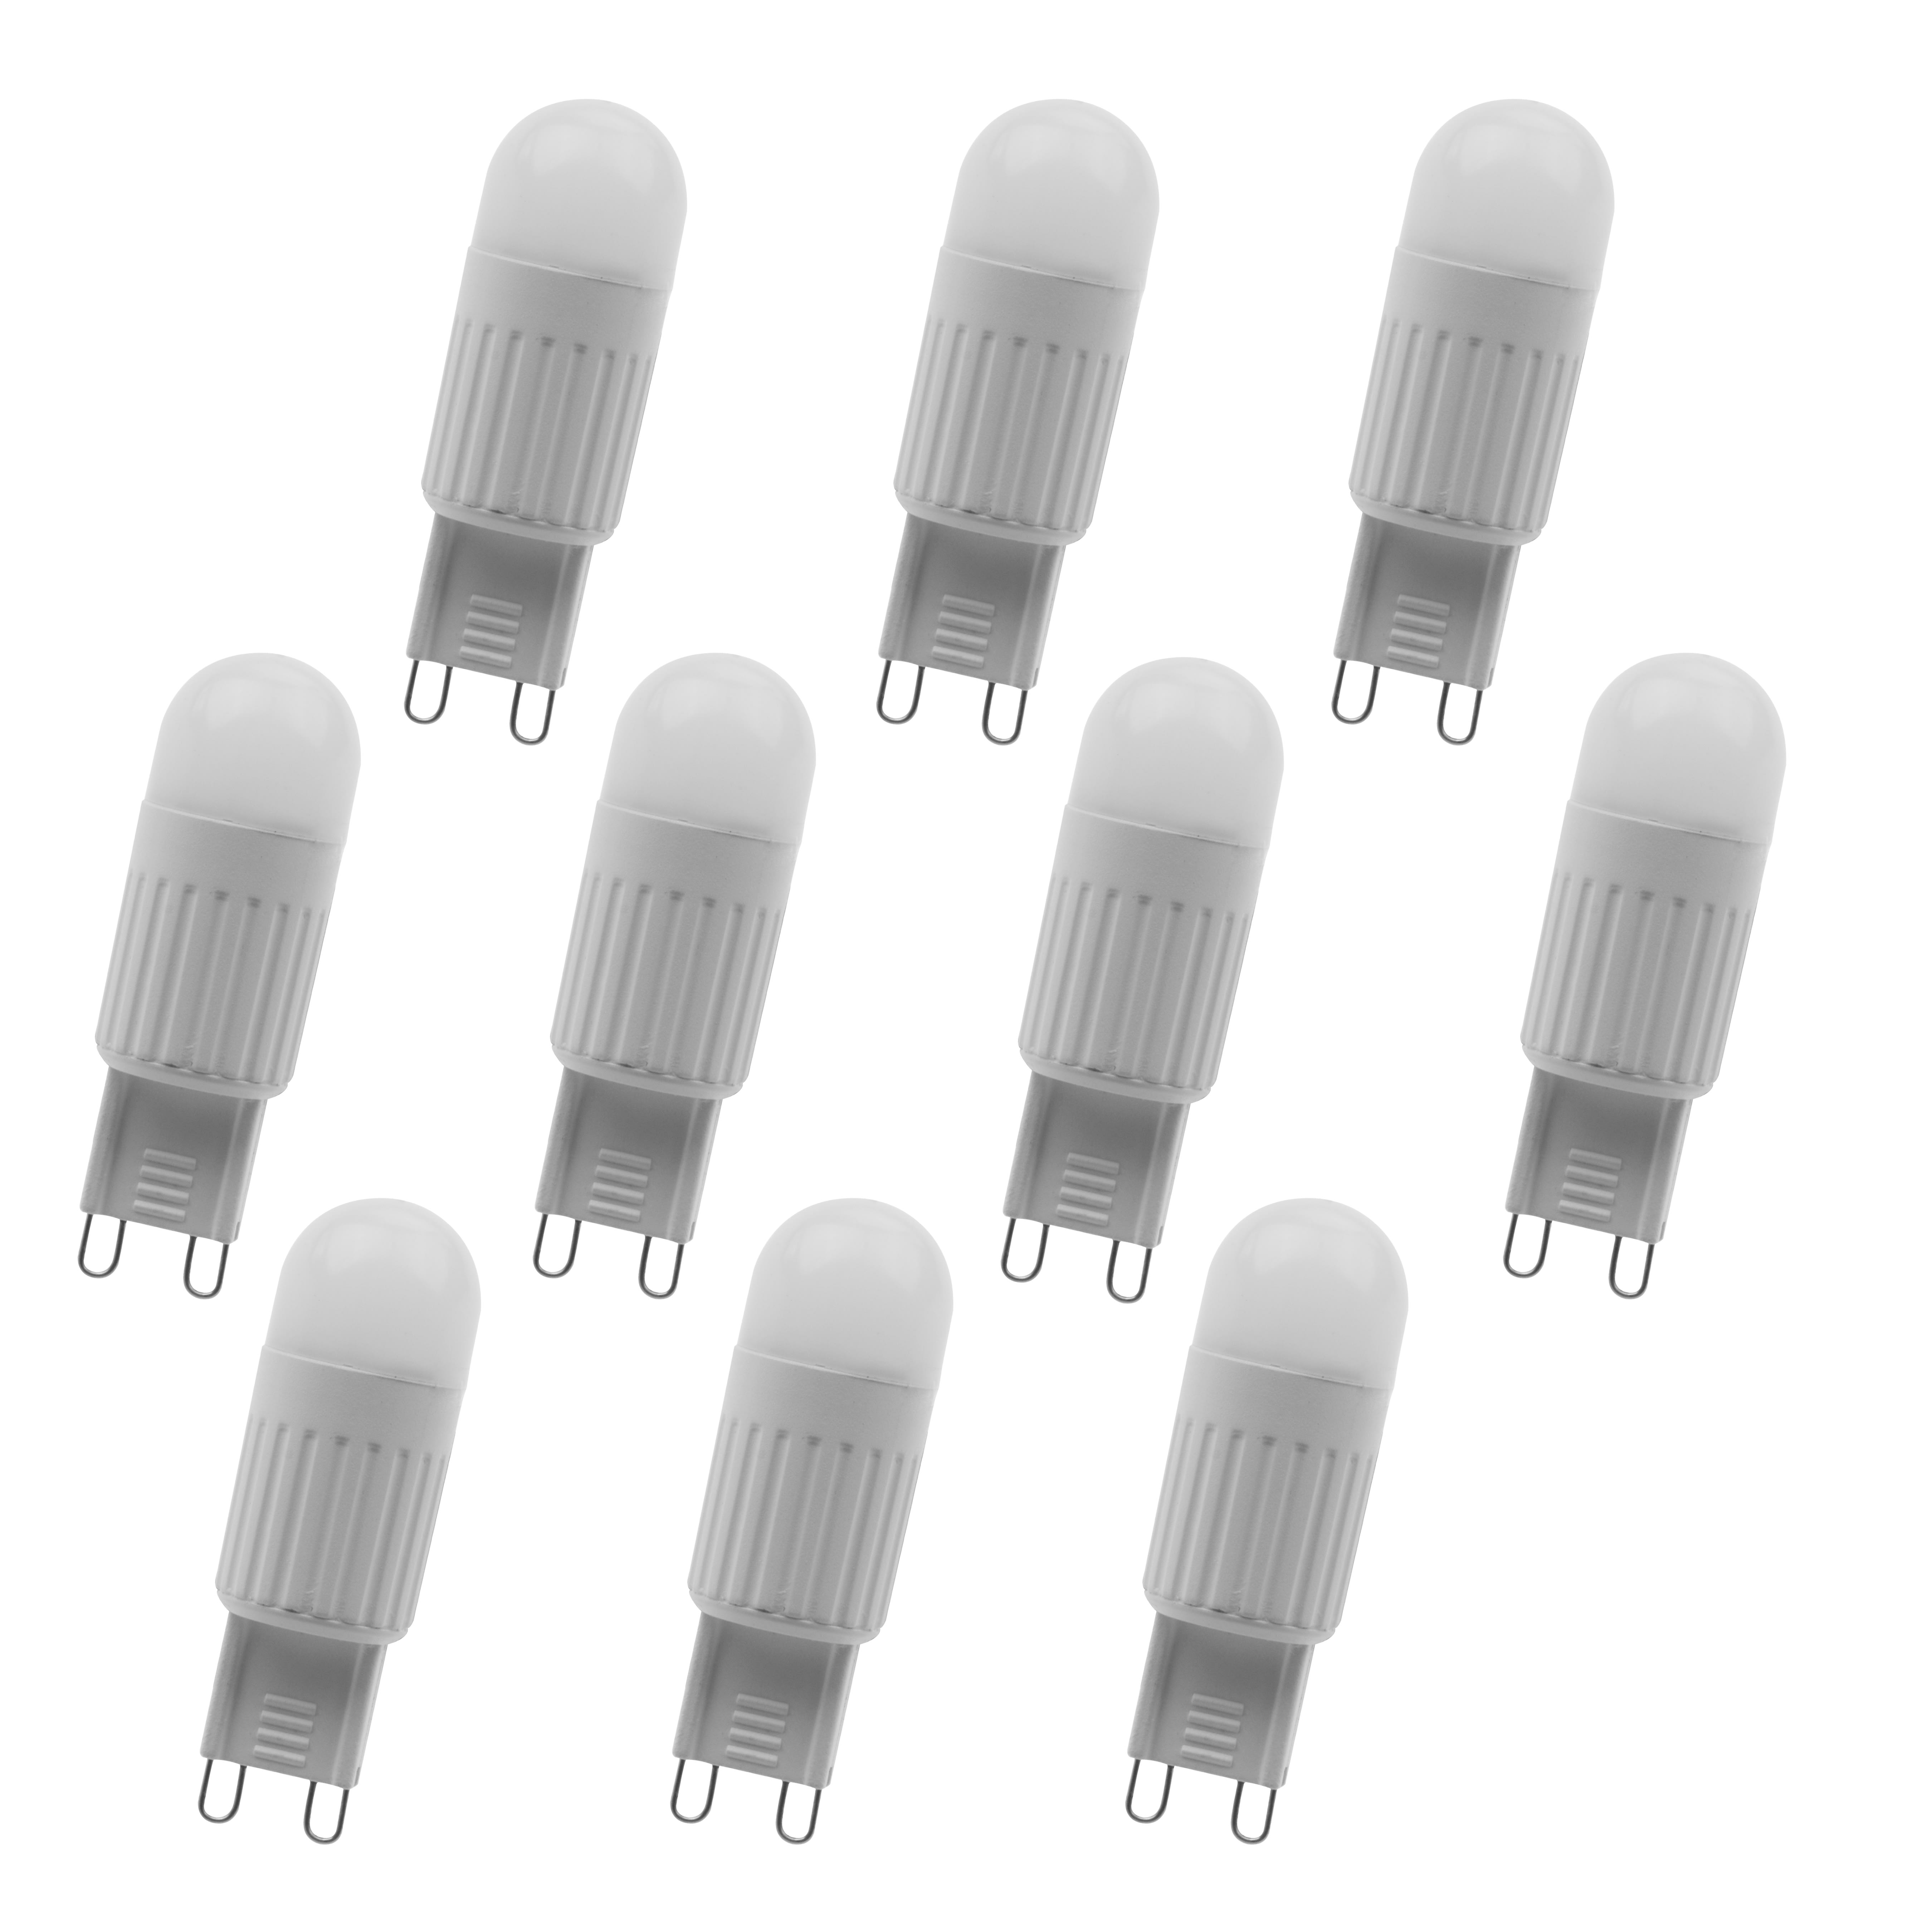 Lighting G9LED101-10PK N/A 3 Frosted Dimmable G9 Base LED - Pack of 10 - LightingDirect.com